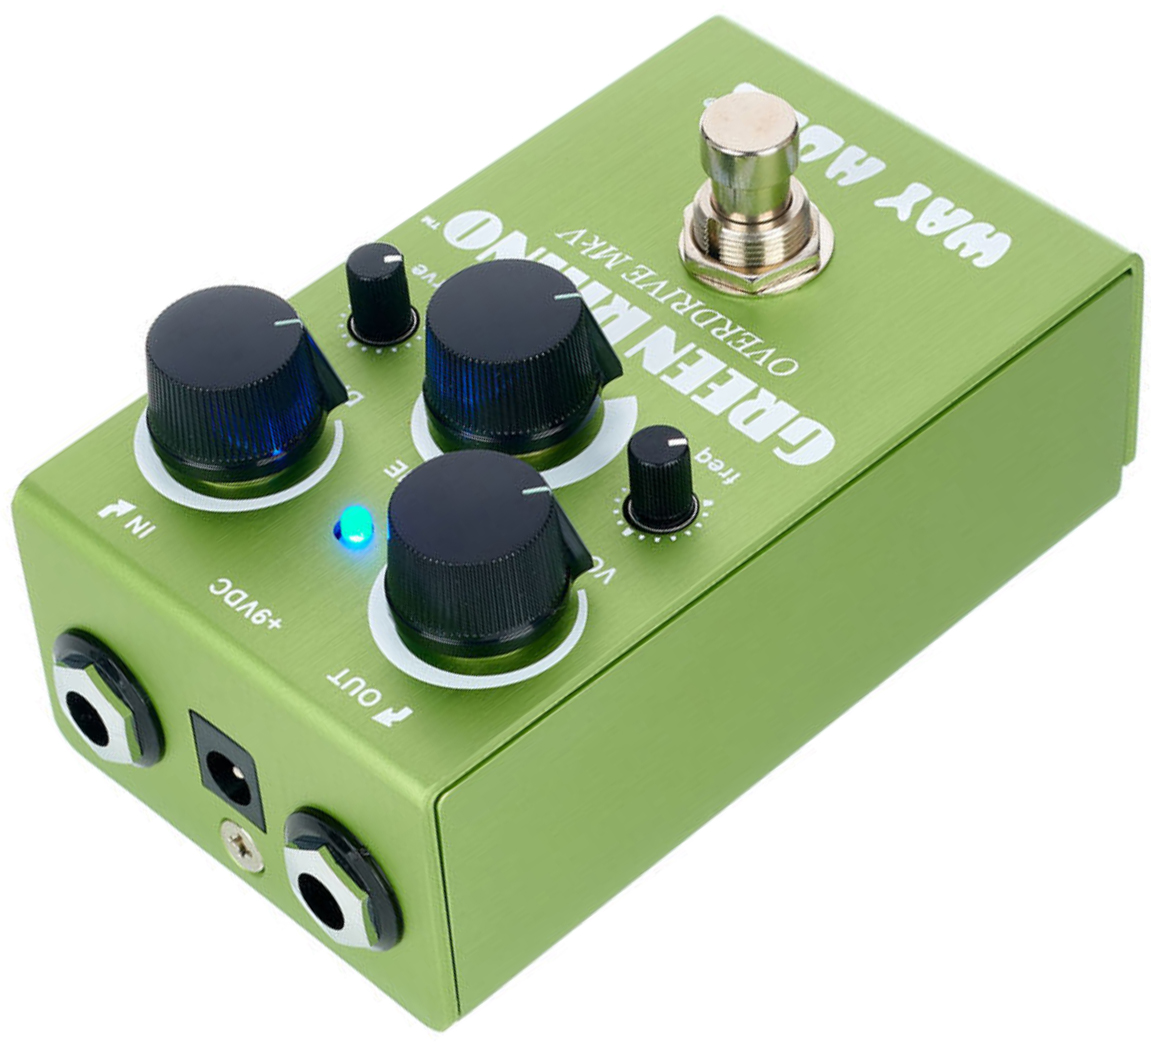 Way Huge Smalls Green Rhino Overdrive Mkv Wm22 - Overdrive, distortion & fuzz effect pedal - Variation 2